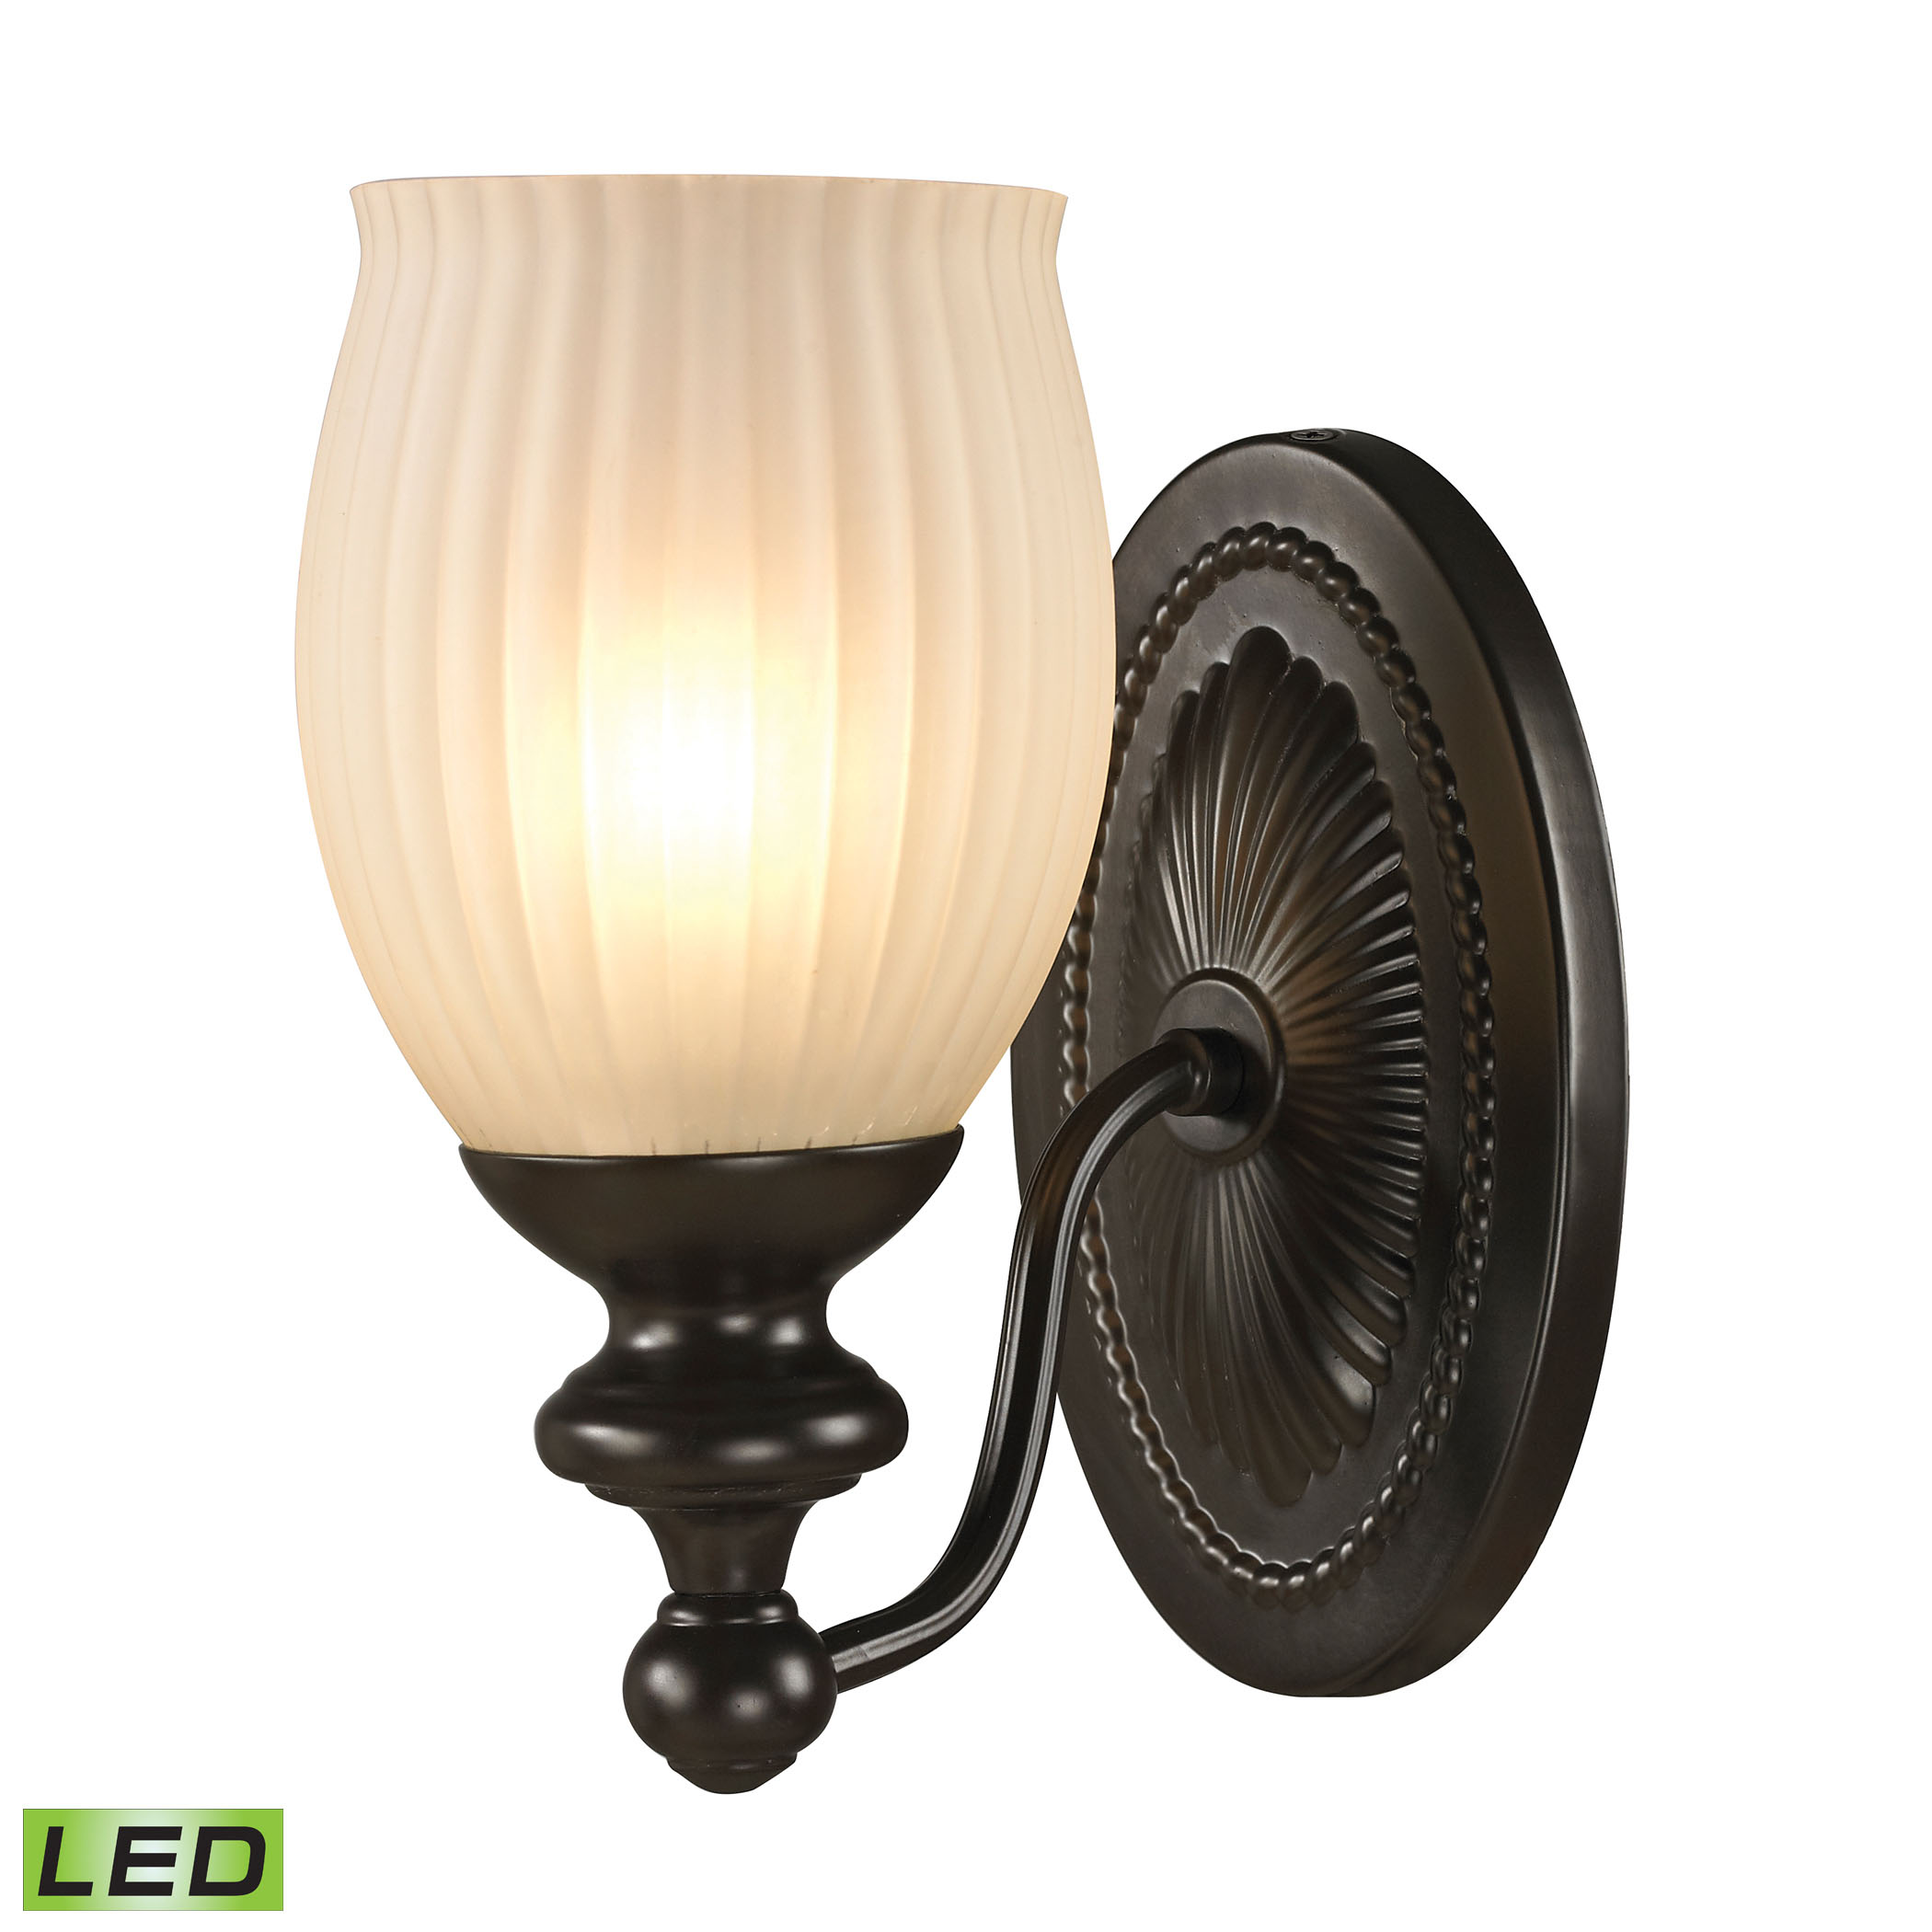 Park Ridge Collection 1 Light Bath in Oil Rubbed Bronze - LED Offering Up To 800 Lumens (60 Watt Equivalent)